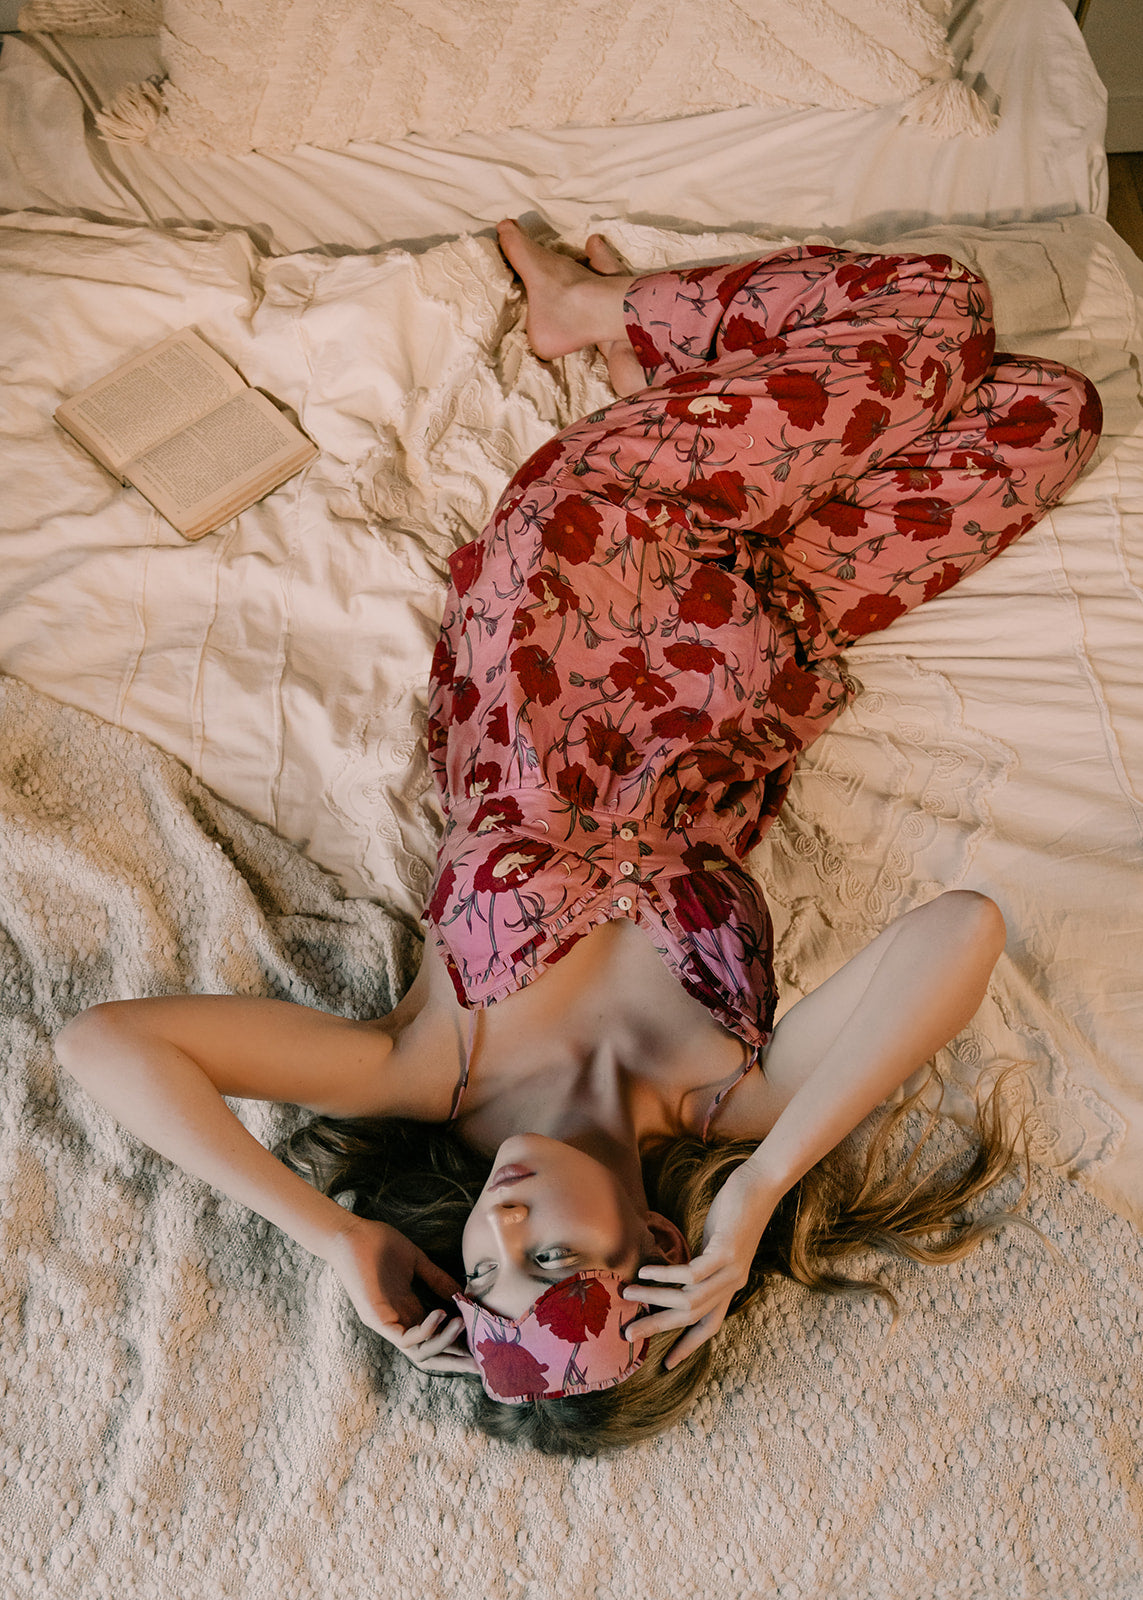 Till Blush Of Night luxury loungewear / pyjama eye mask style made out of lightweight Tencel eco-friendly fabric in pink and red colorway 